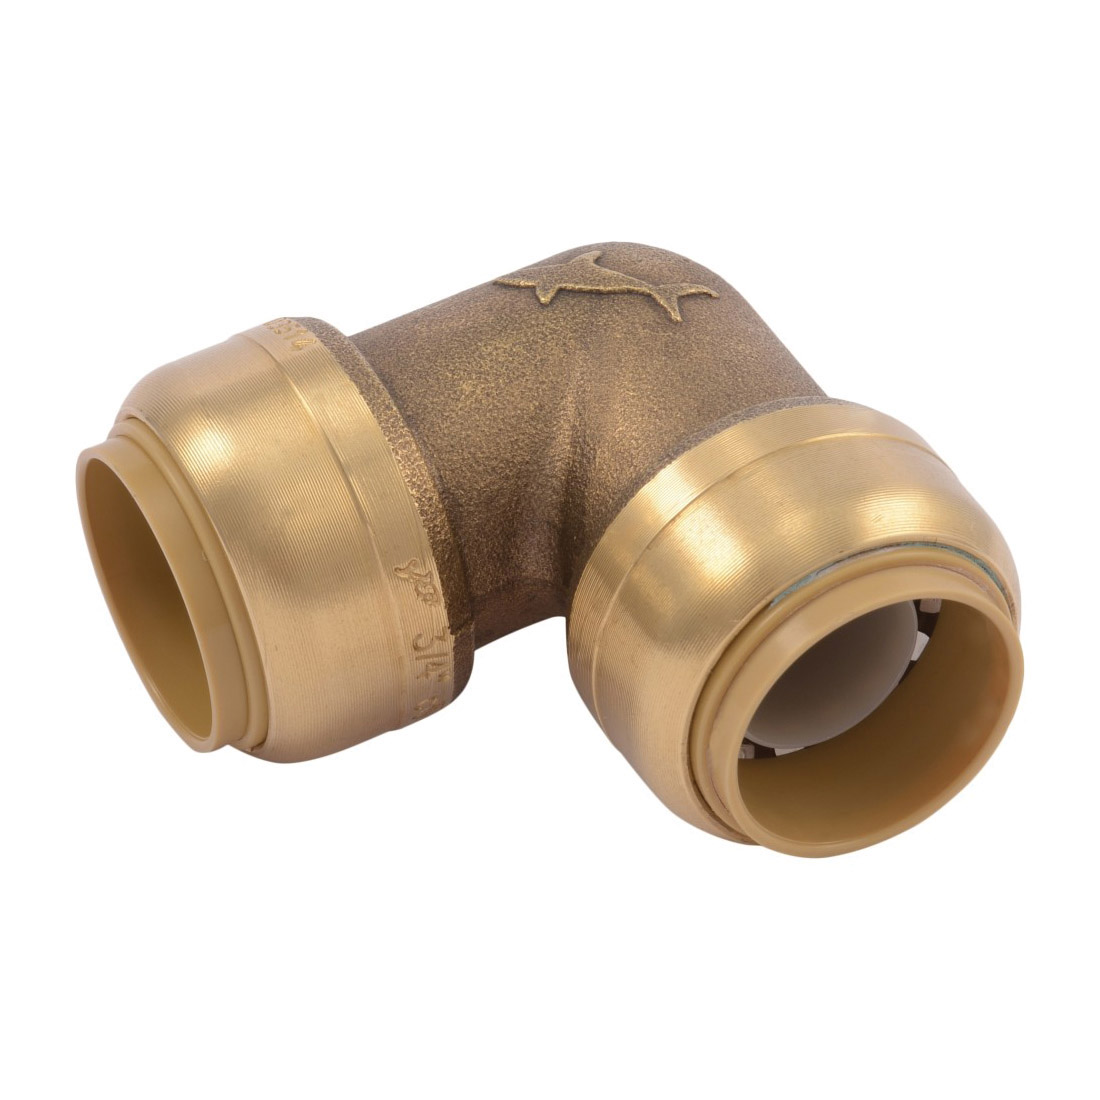 Sharkbite® U256LF Pipe Elbow, 3/4 in Nominal, Push-Fit End Style, Brass, Natural Brass/Chrome Plated, Import